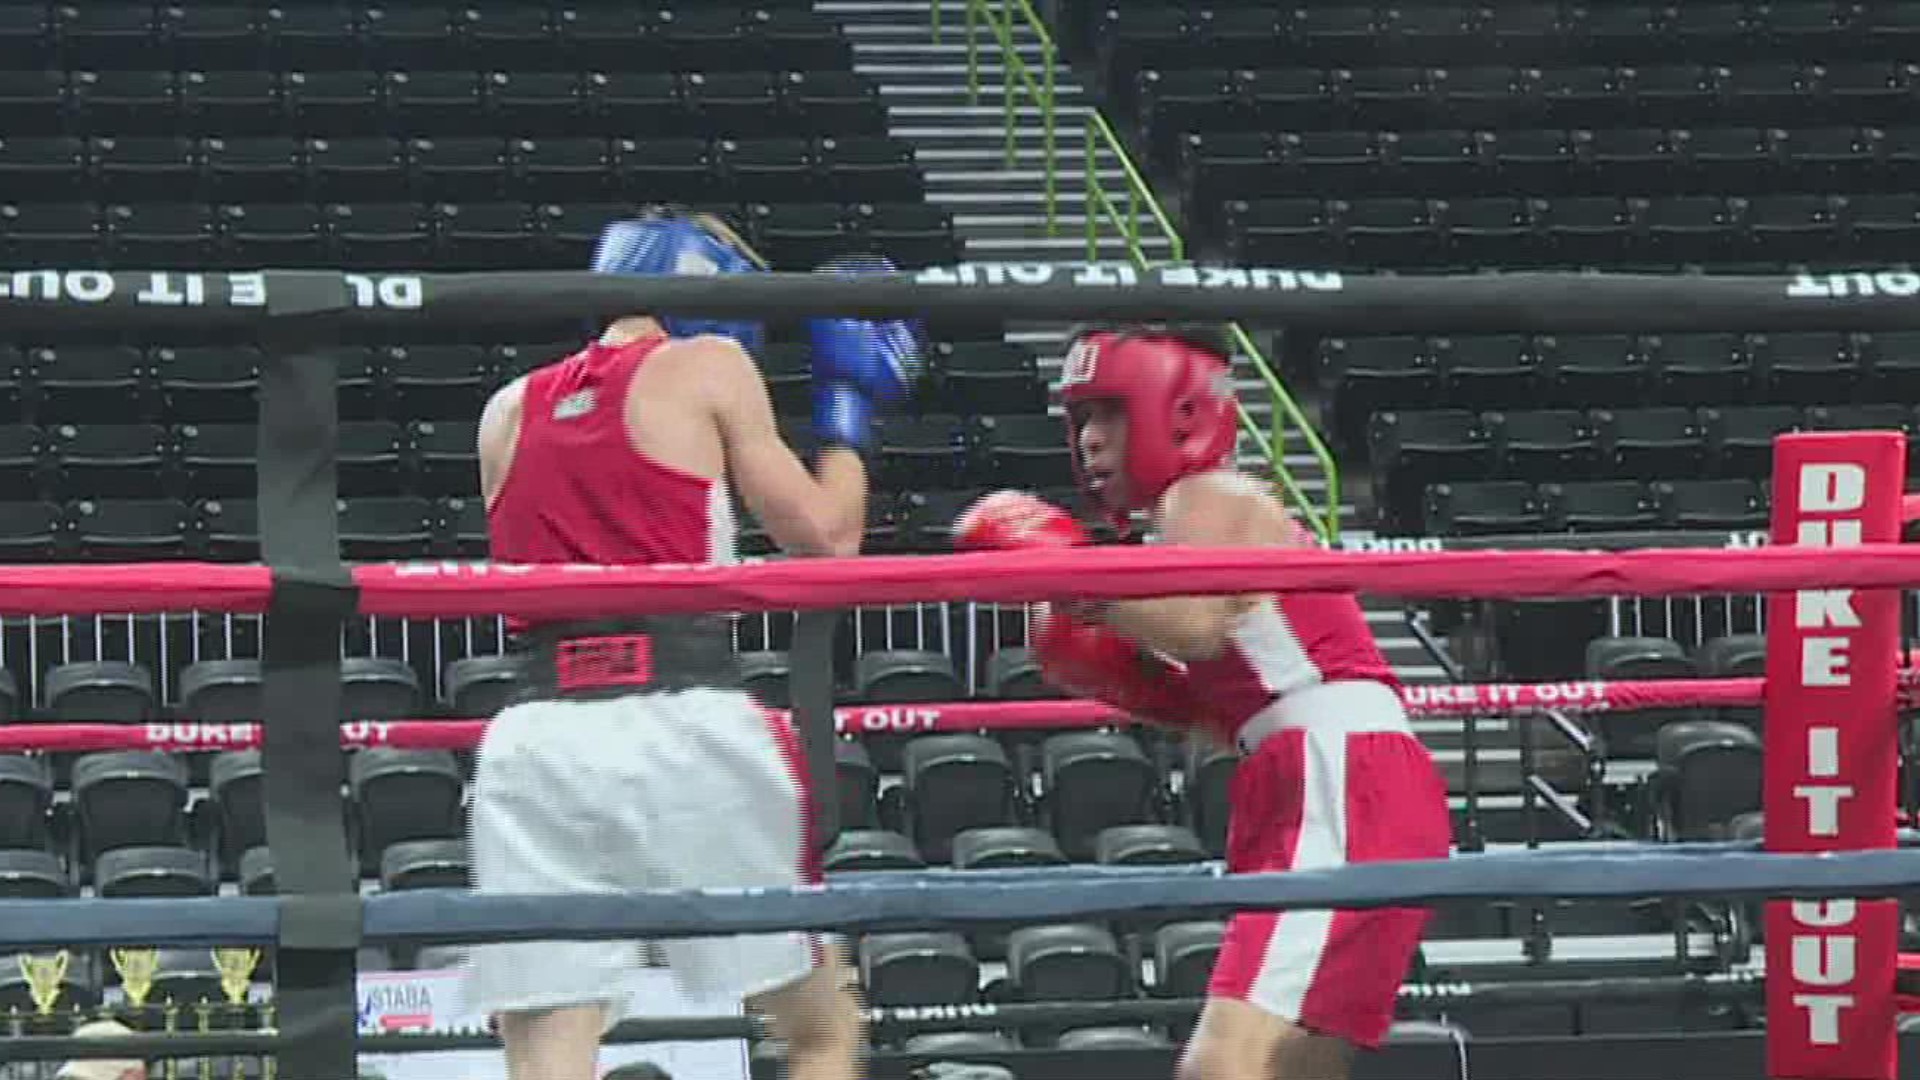 It's the first time the boxing tournament has been hosted in Corpus Christi since 1991, and it's an important step in the careers of these Olympic hopefuls.